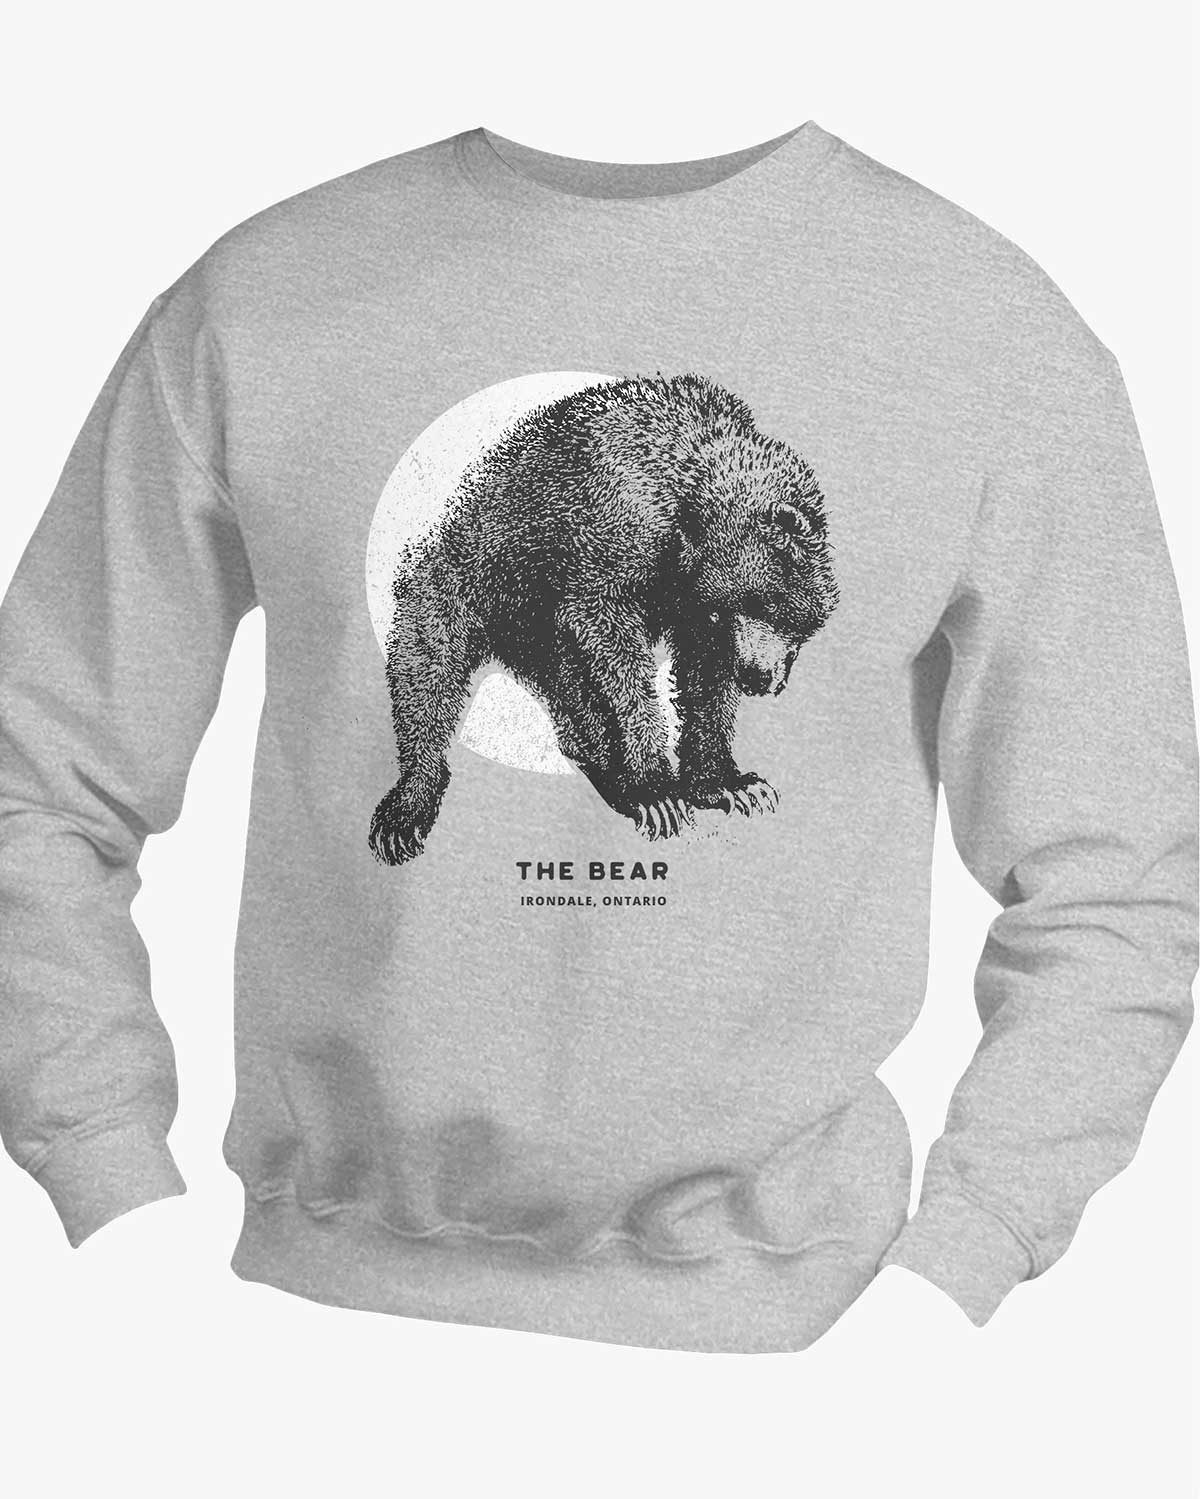 The Bear - Irondale - Sweater